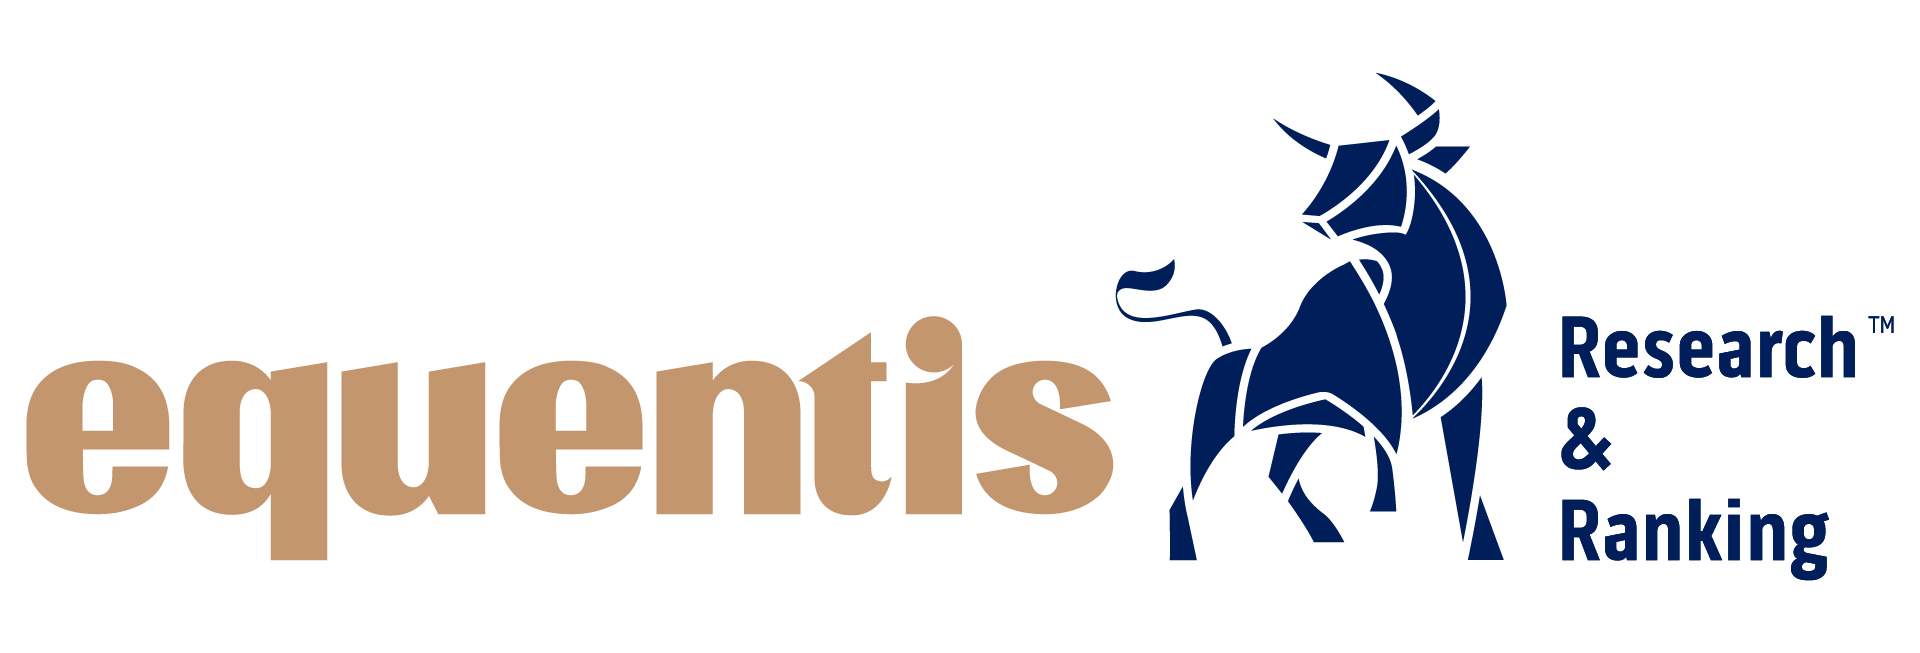 equentis research and ranking